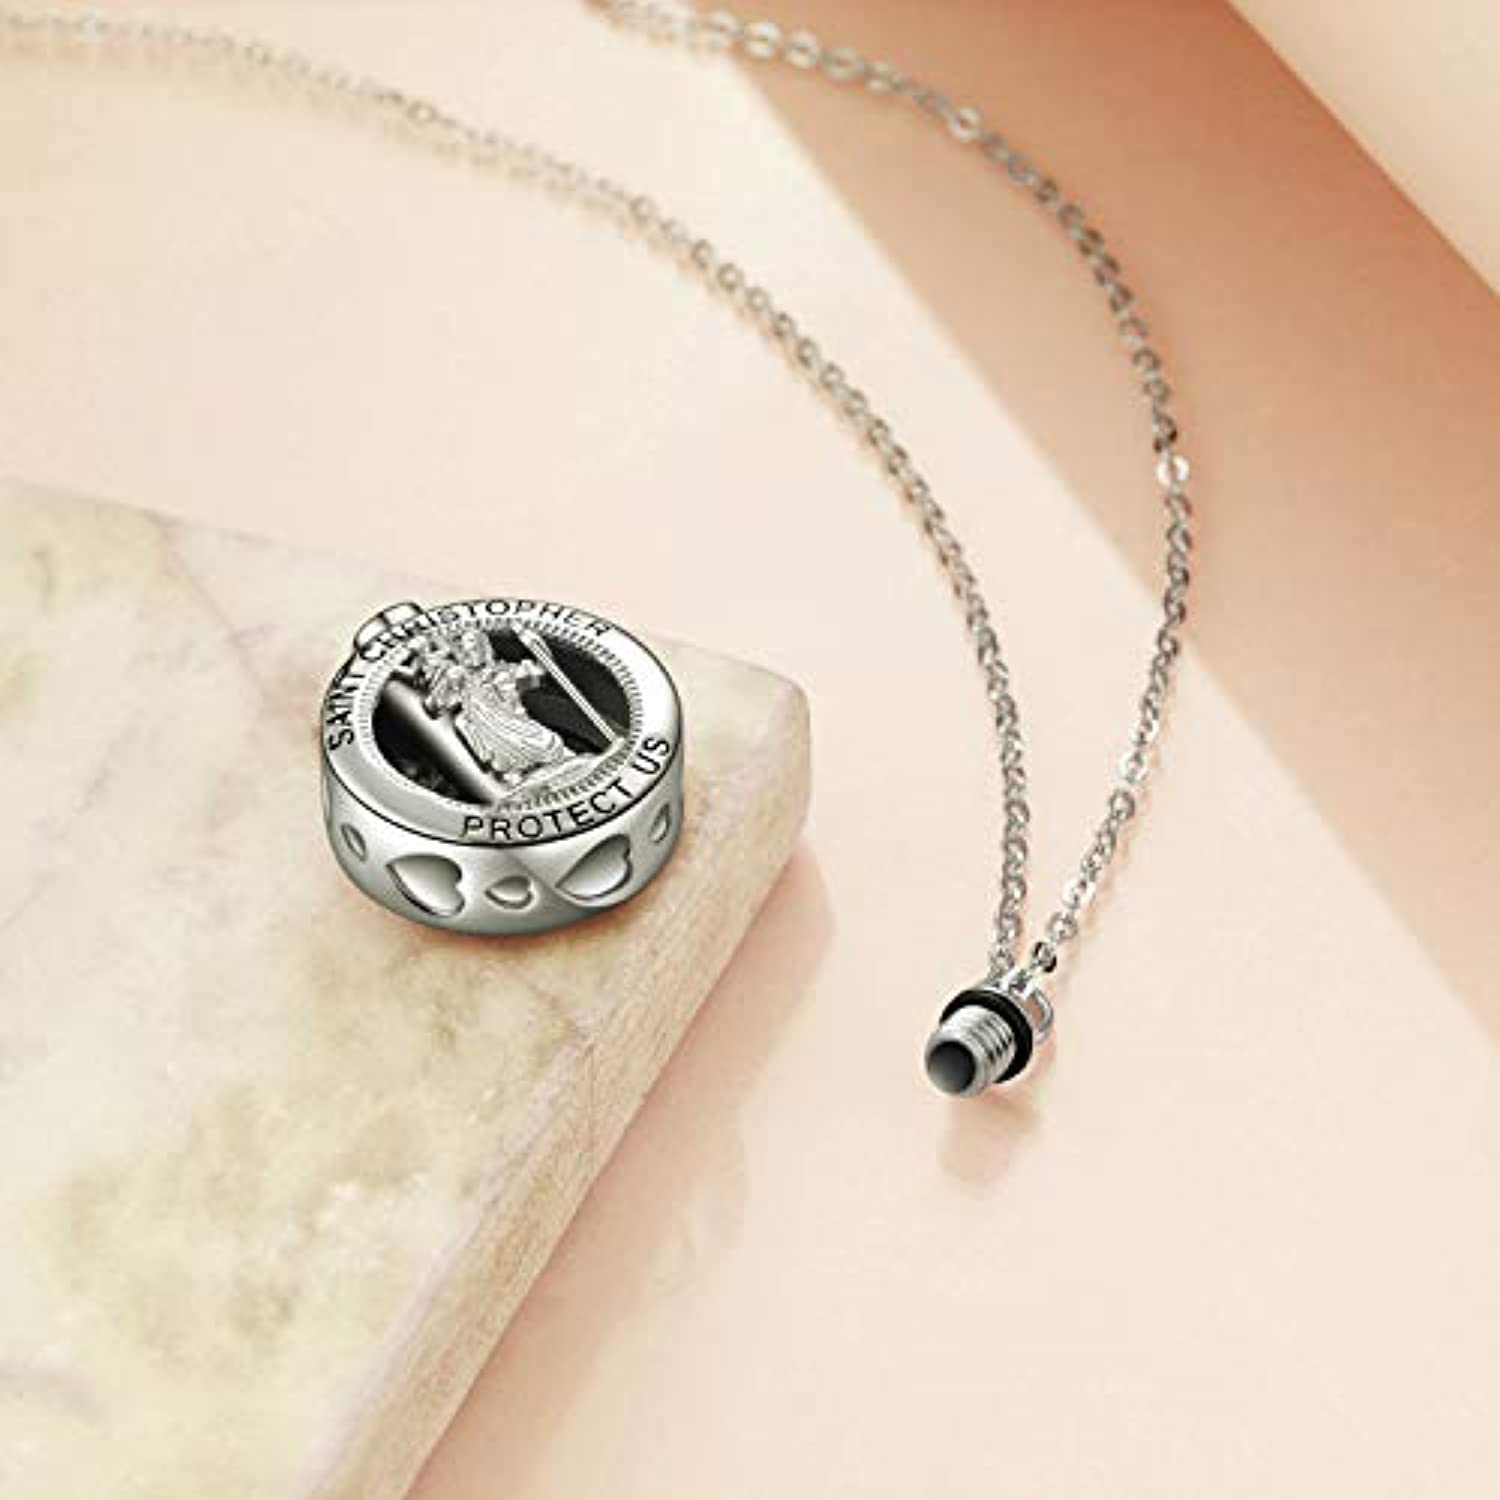 Saint Christopher Protect Us Necklace Urn Necklace for Ashes 925 Sterling Silver Religious Engraved Medallion Pendant Necklace Jewelry